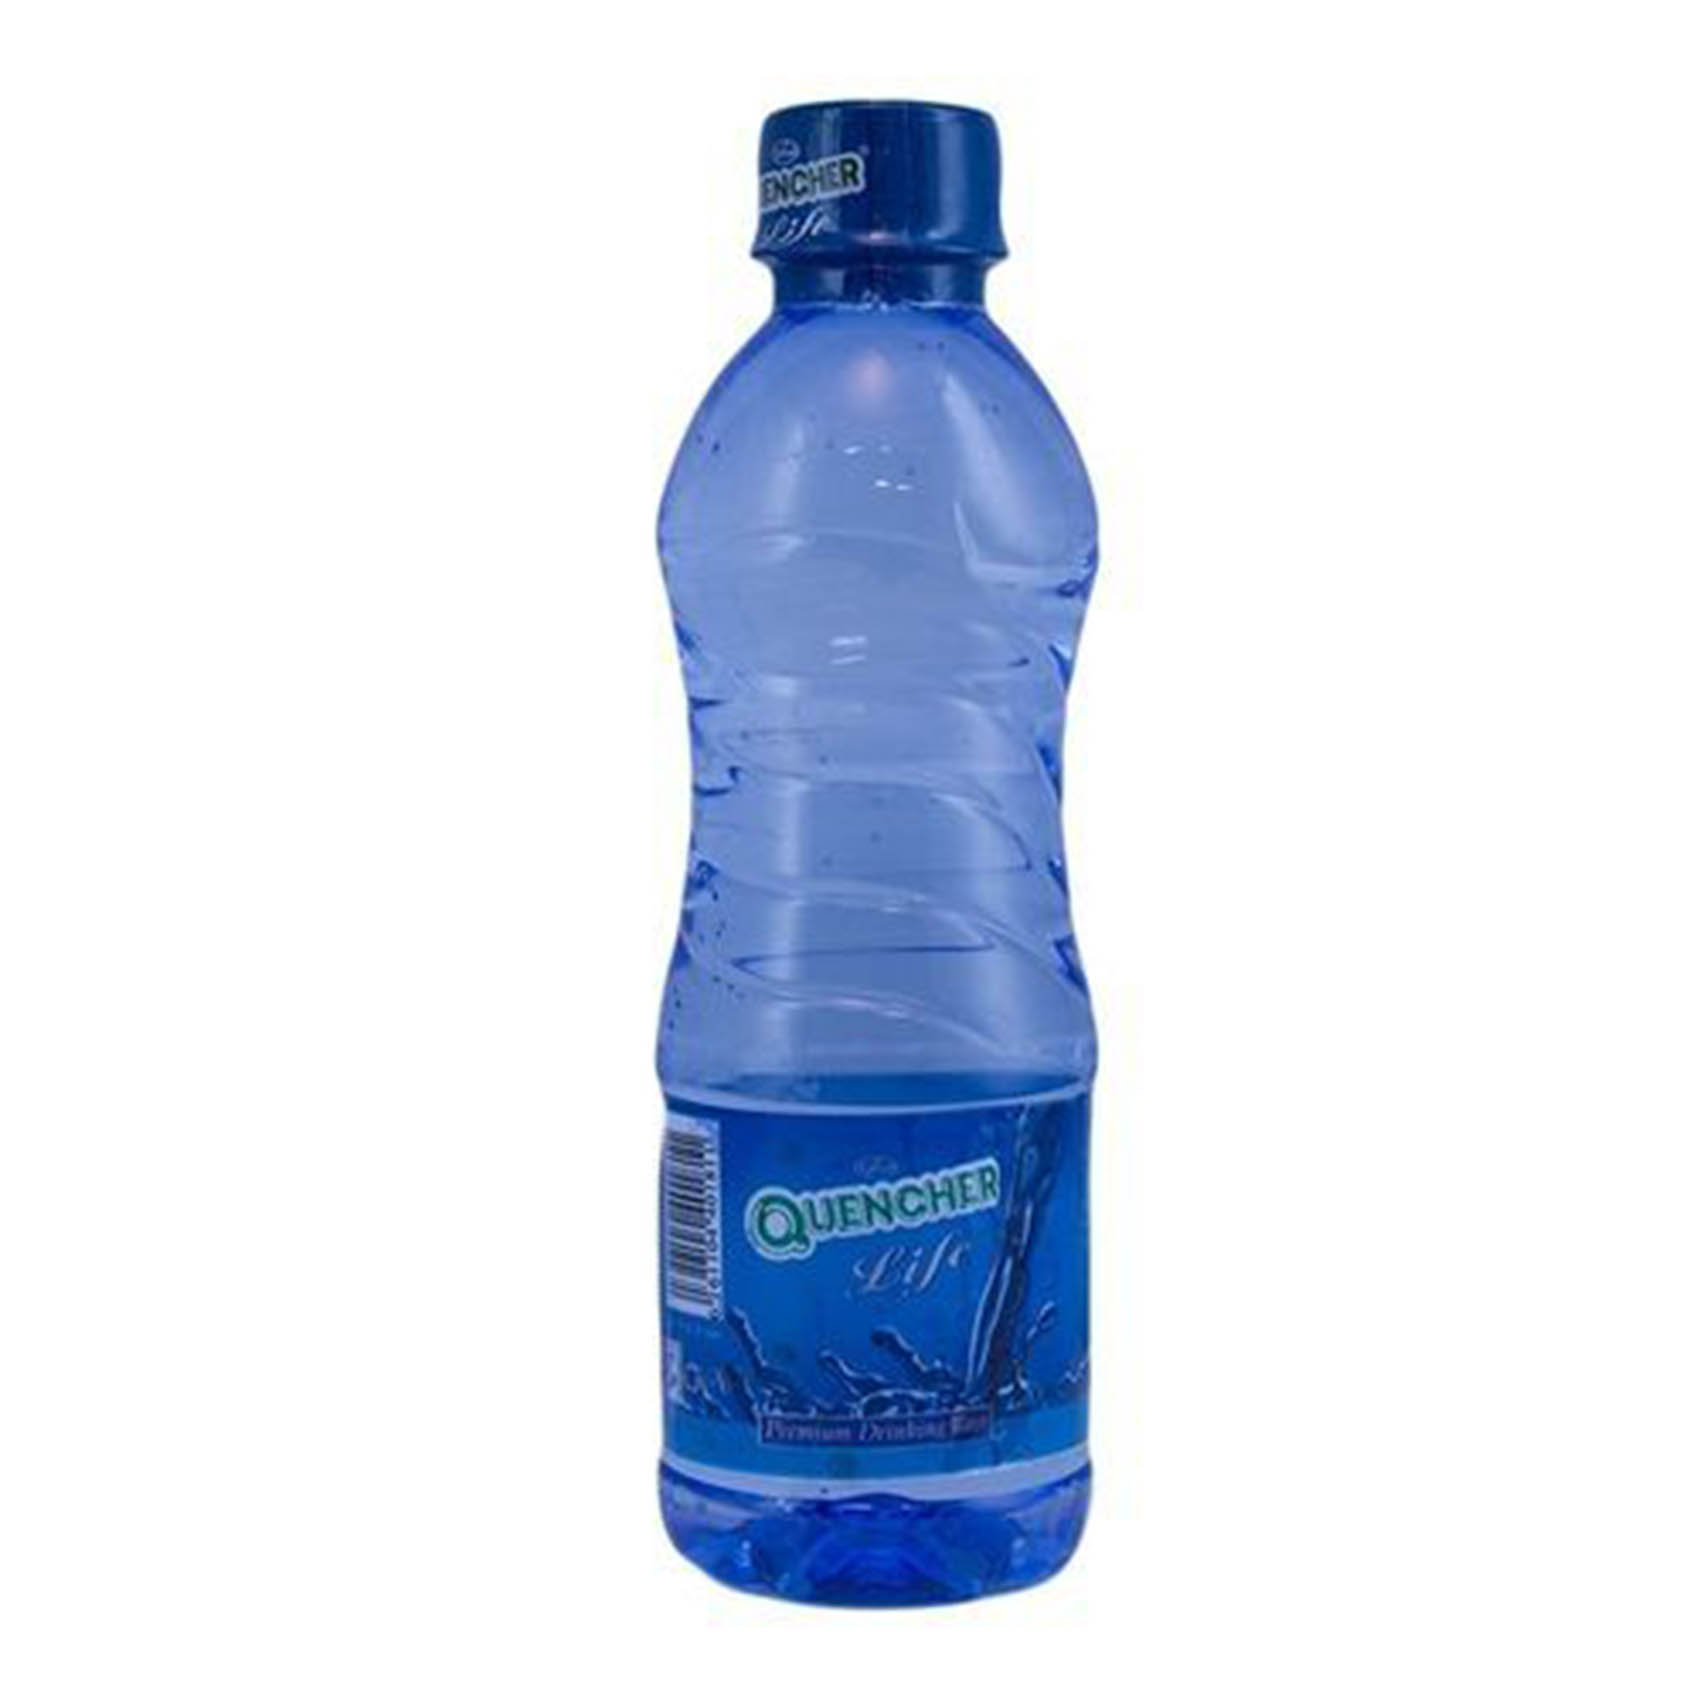 Quencher Life Premium Drinking Water 300ml